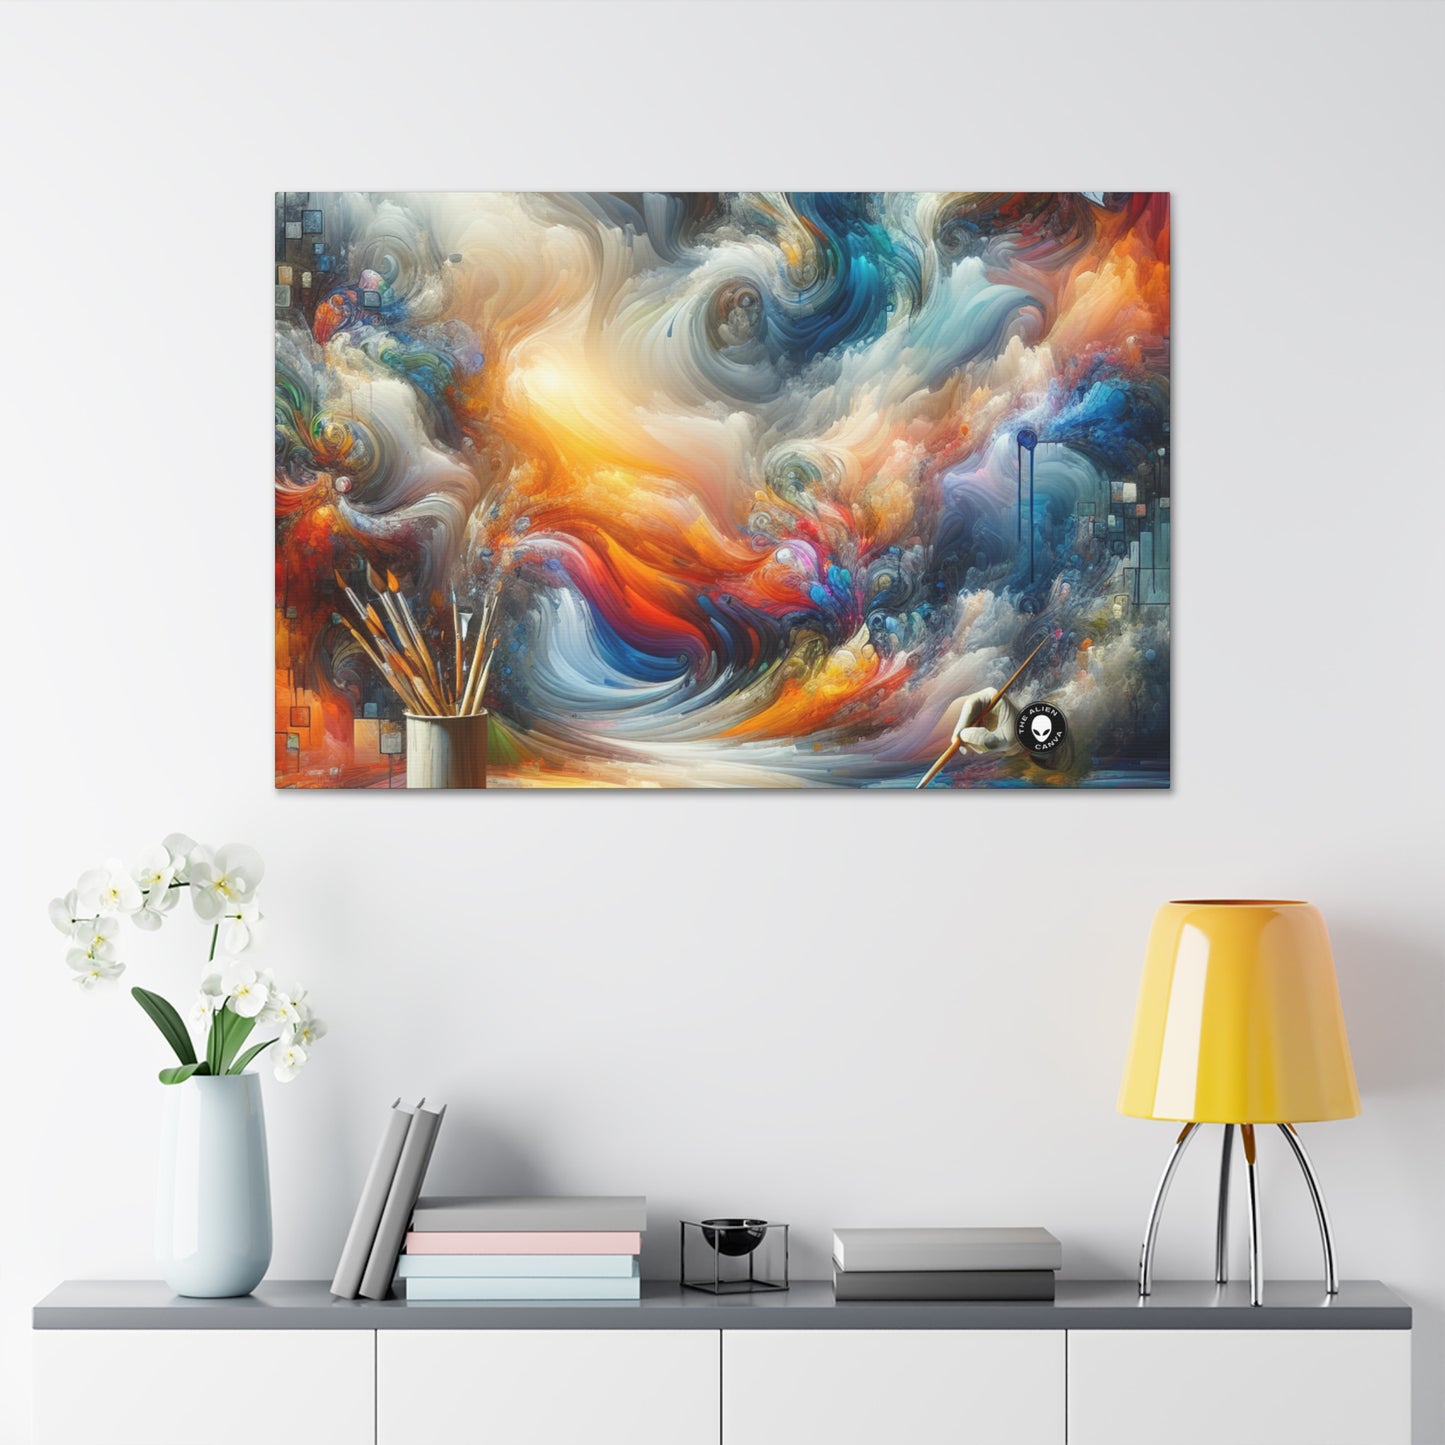 "Mystical Forest: A Whimsical Wonderland" - The Alien Canva Digital Painting